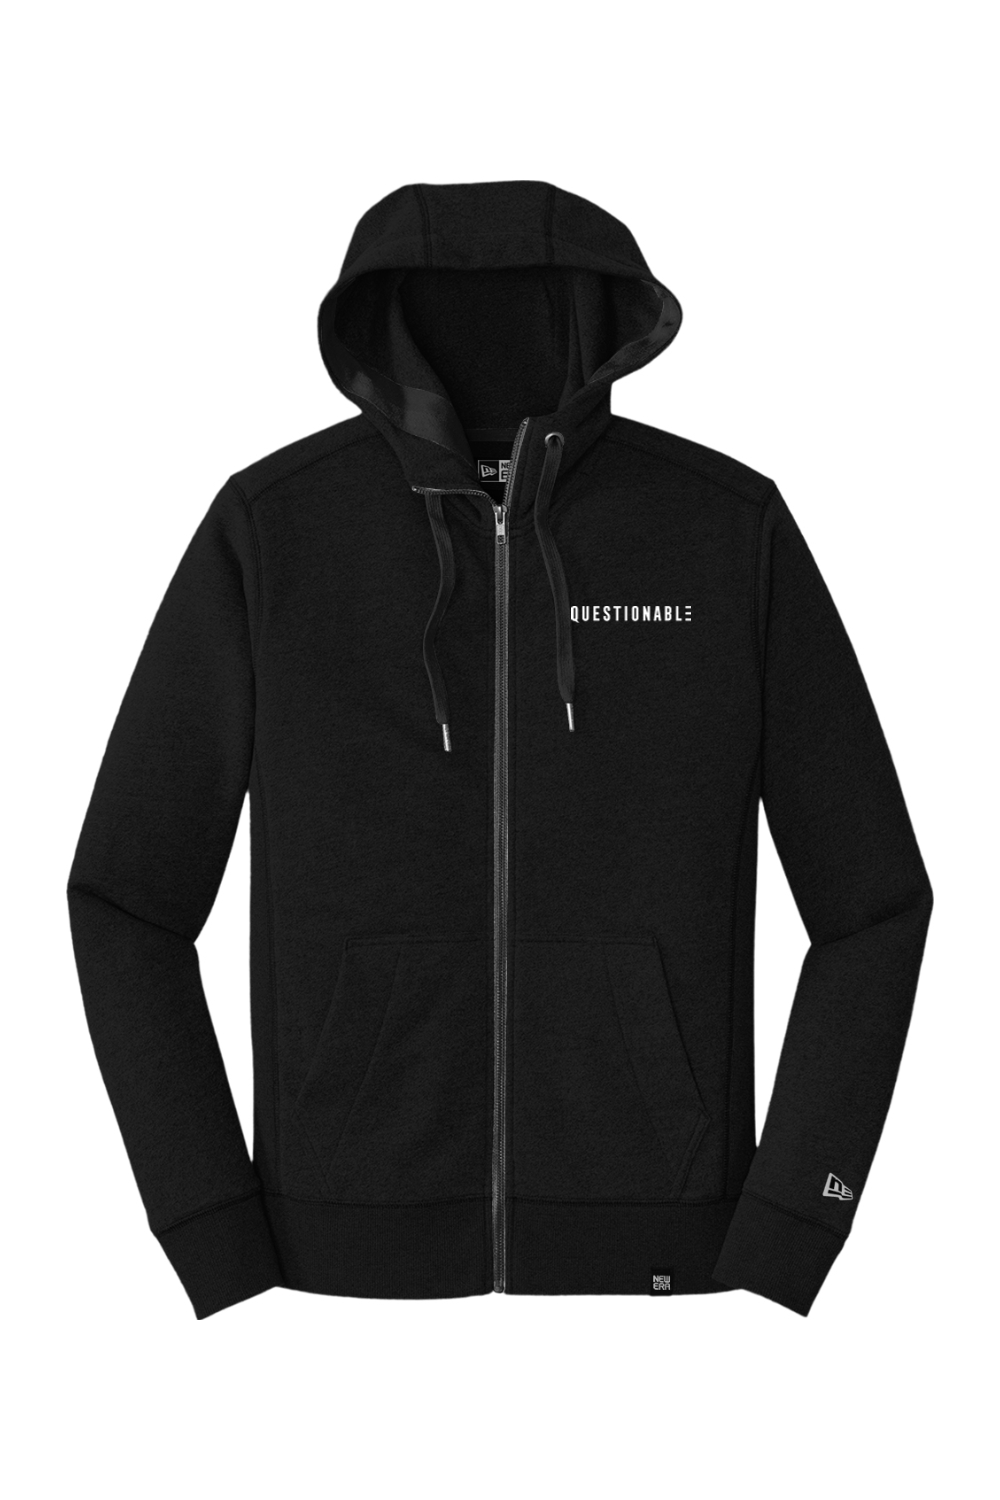 D-Mon - New Era French Terry Lions Full-Zip Hoodie